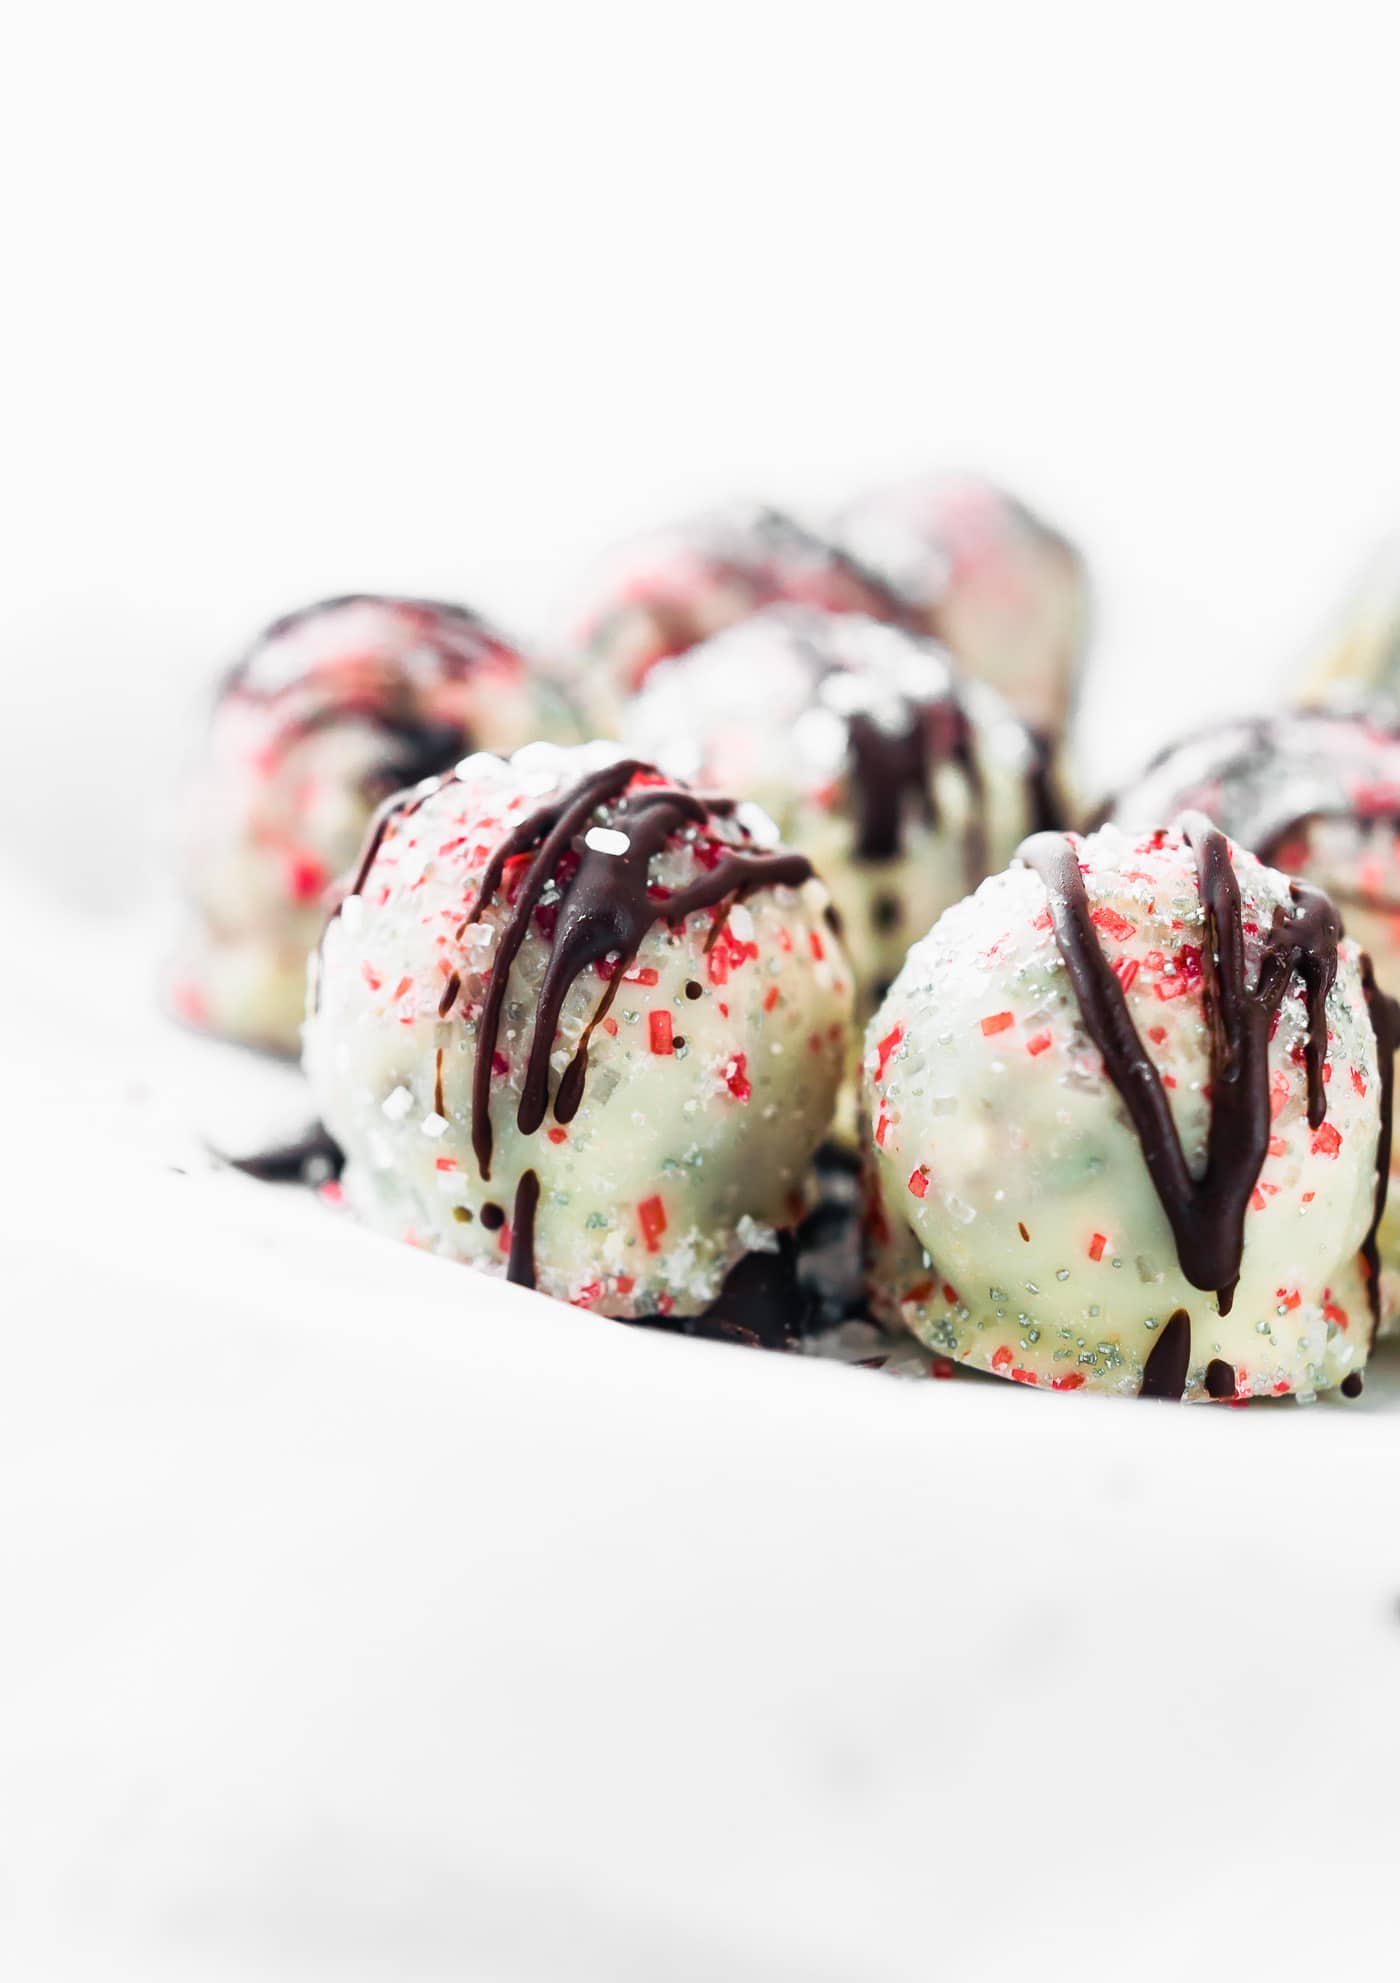 White Chocolate Peppermint Rum Balls for easy no bake Holiday dessert! This quick festive dessert made with gluten free ingredients. Non alcoholic version option too! 